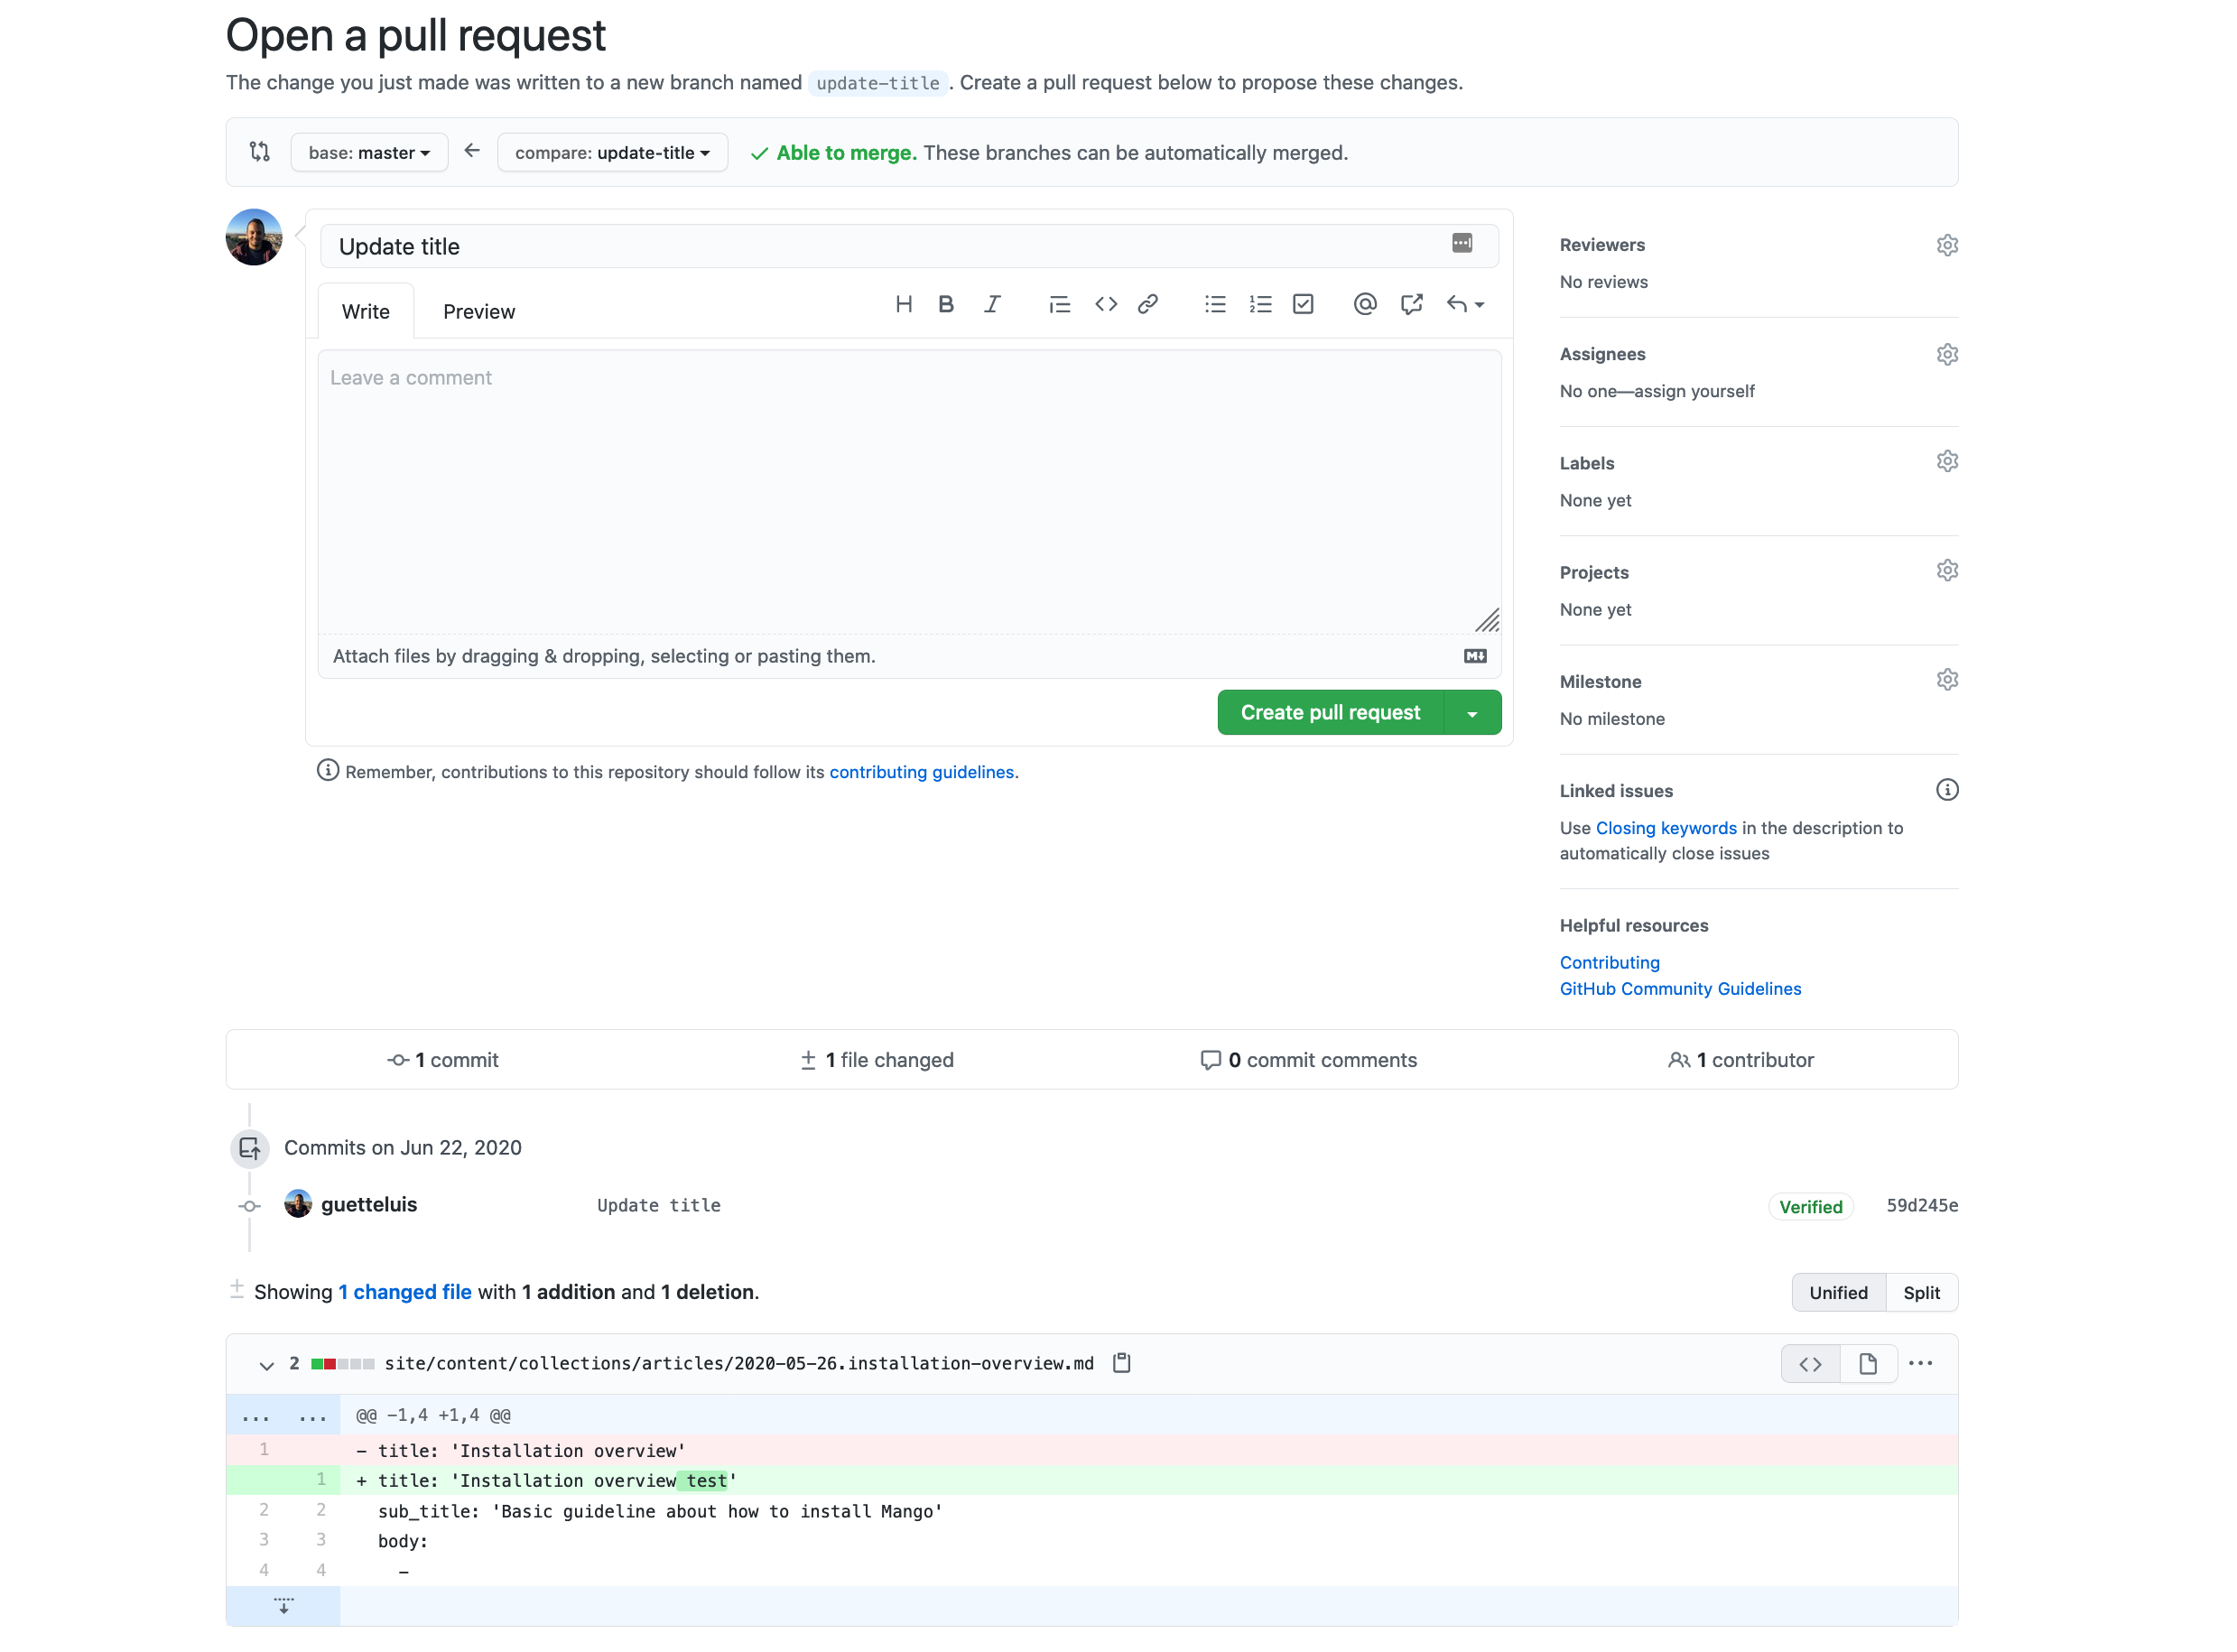 Open a Pull Request